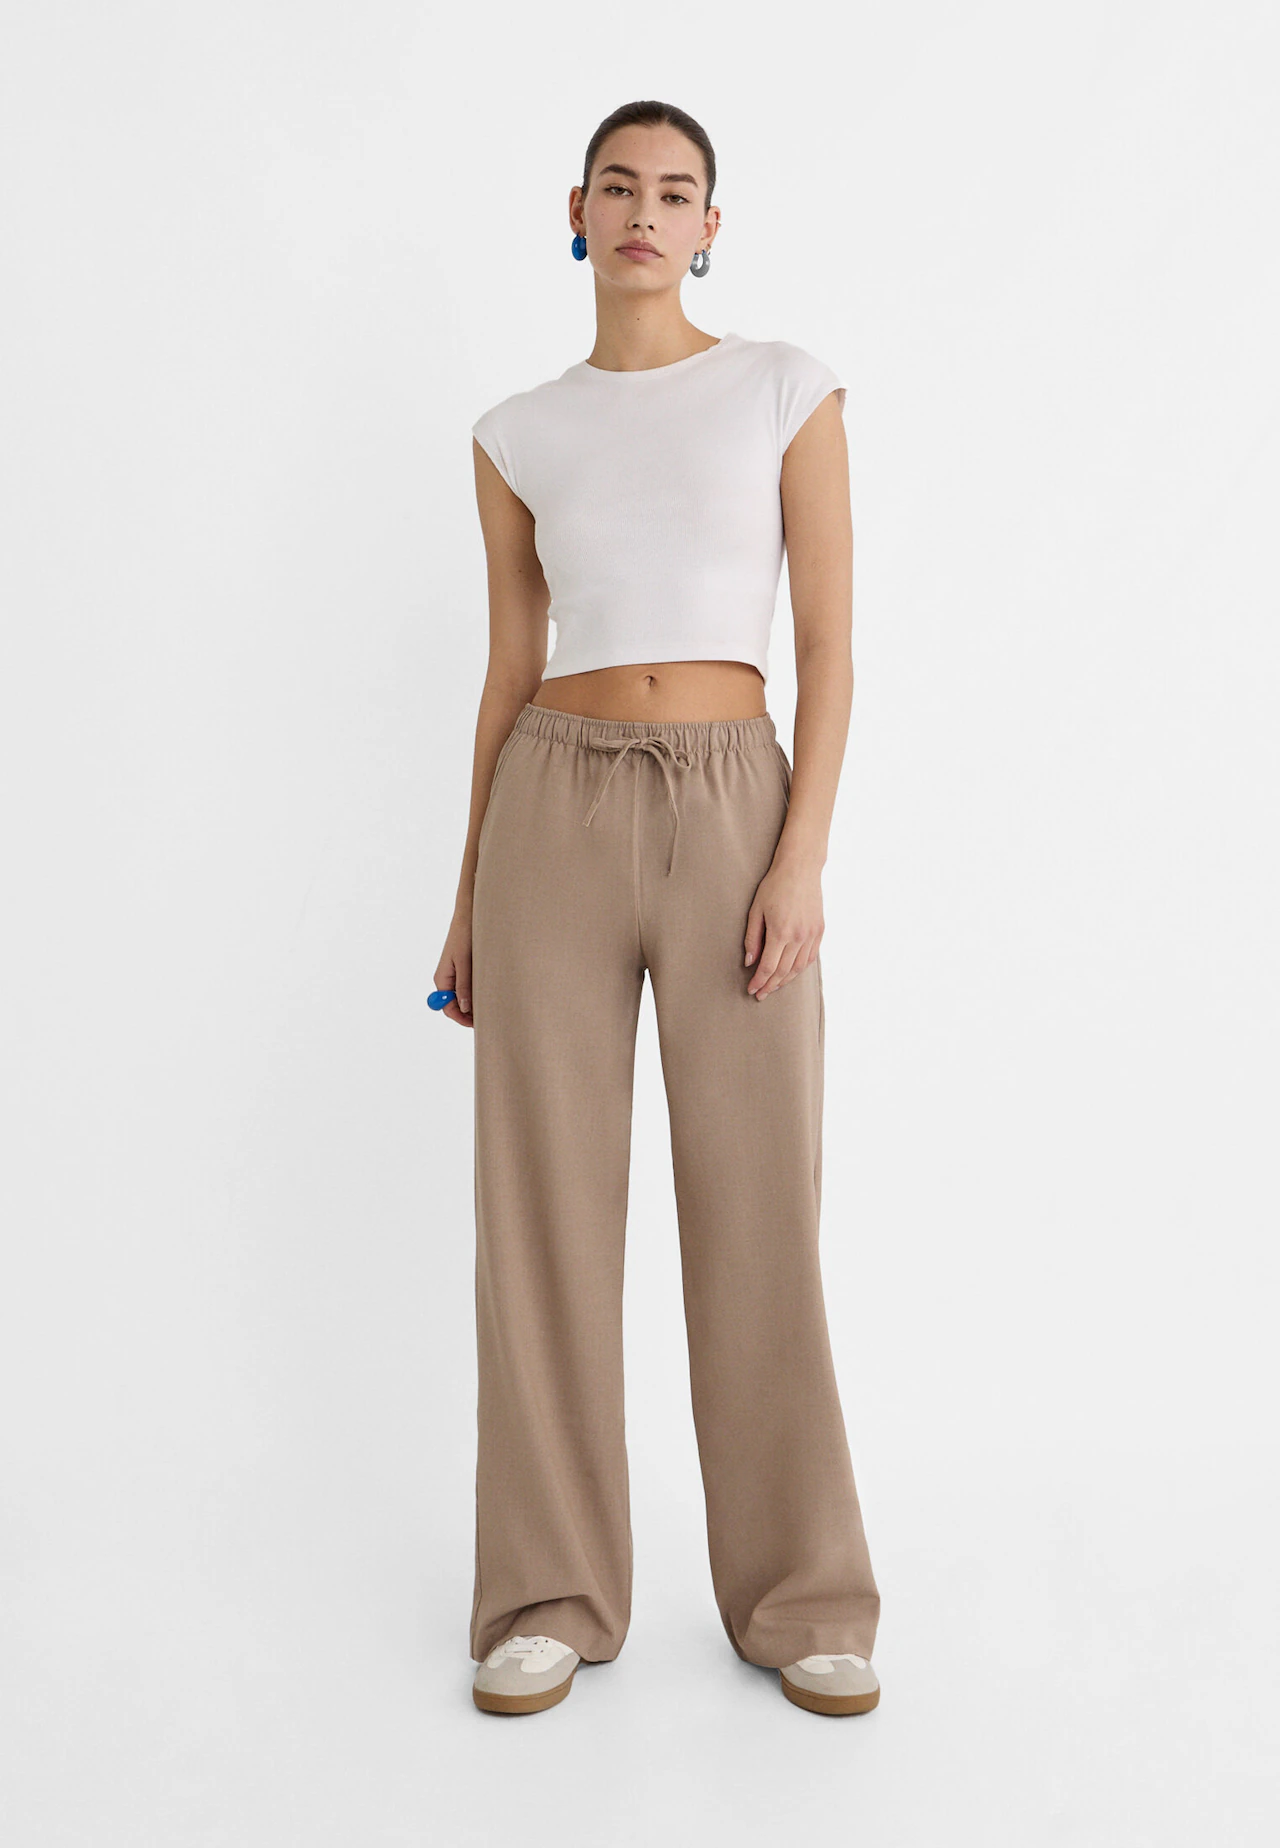 Plain knit flared trousers